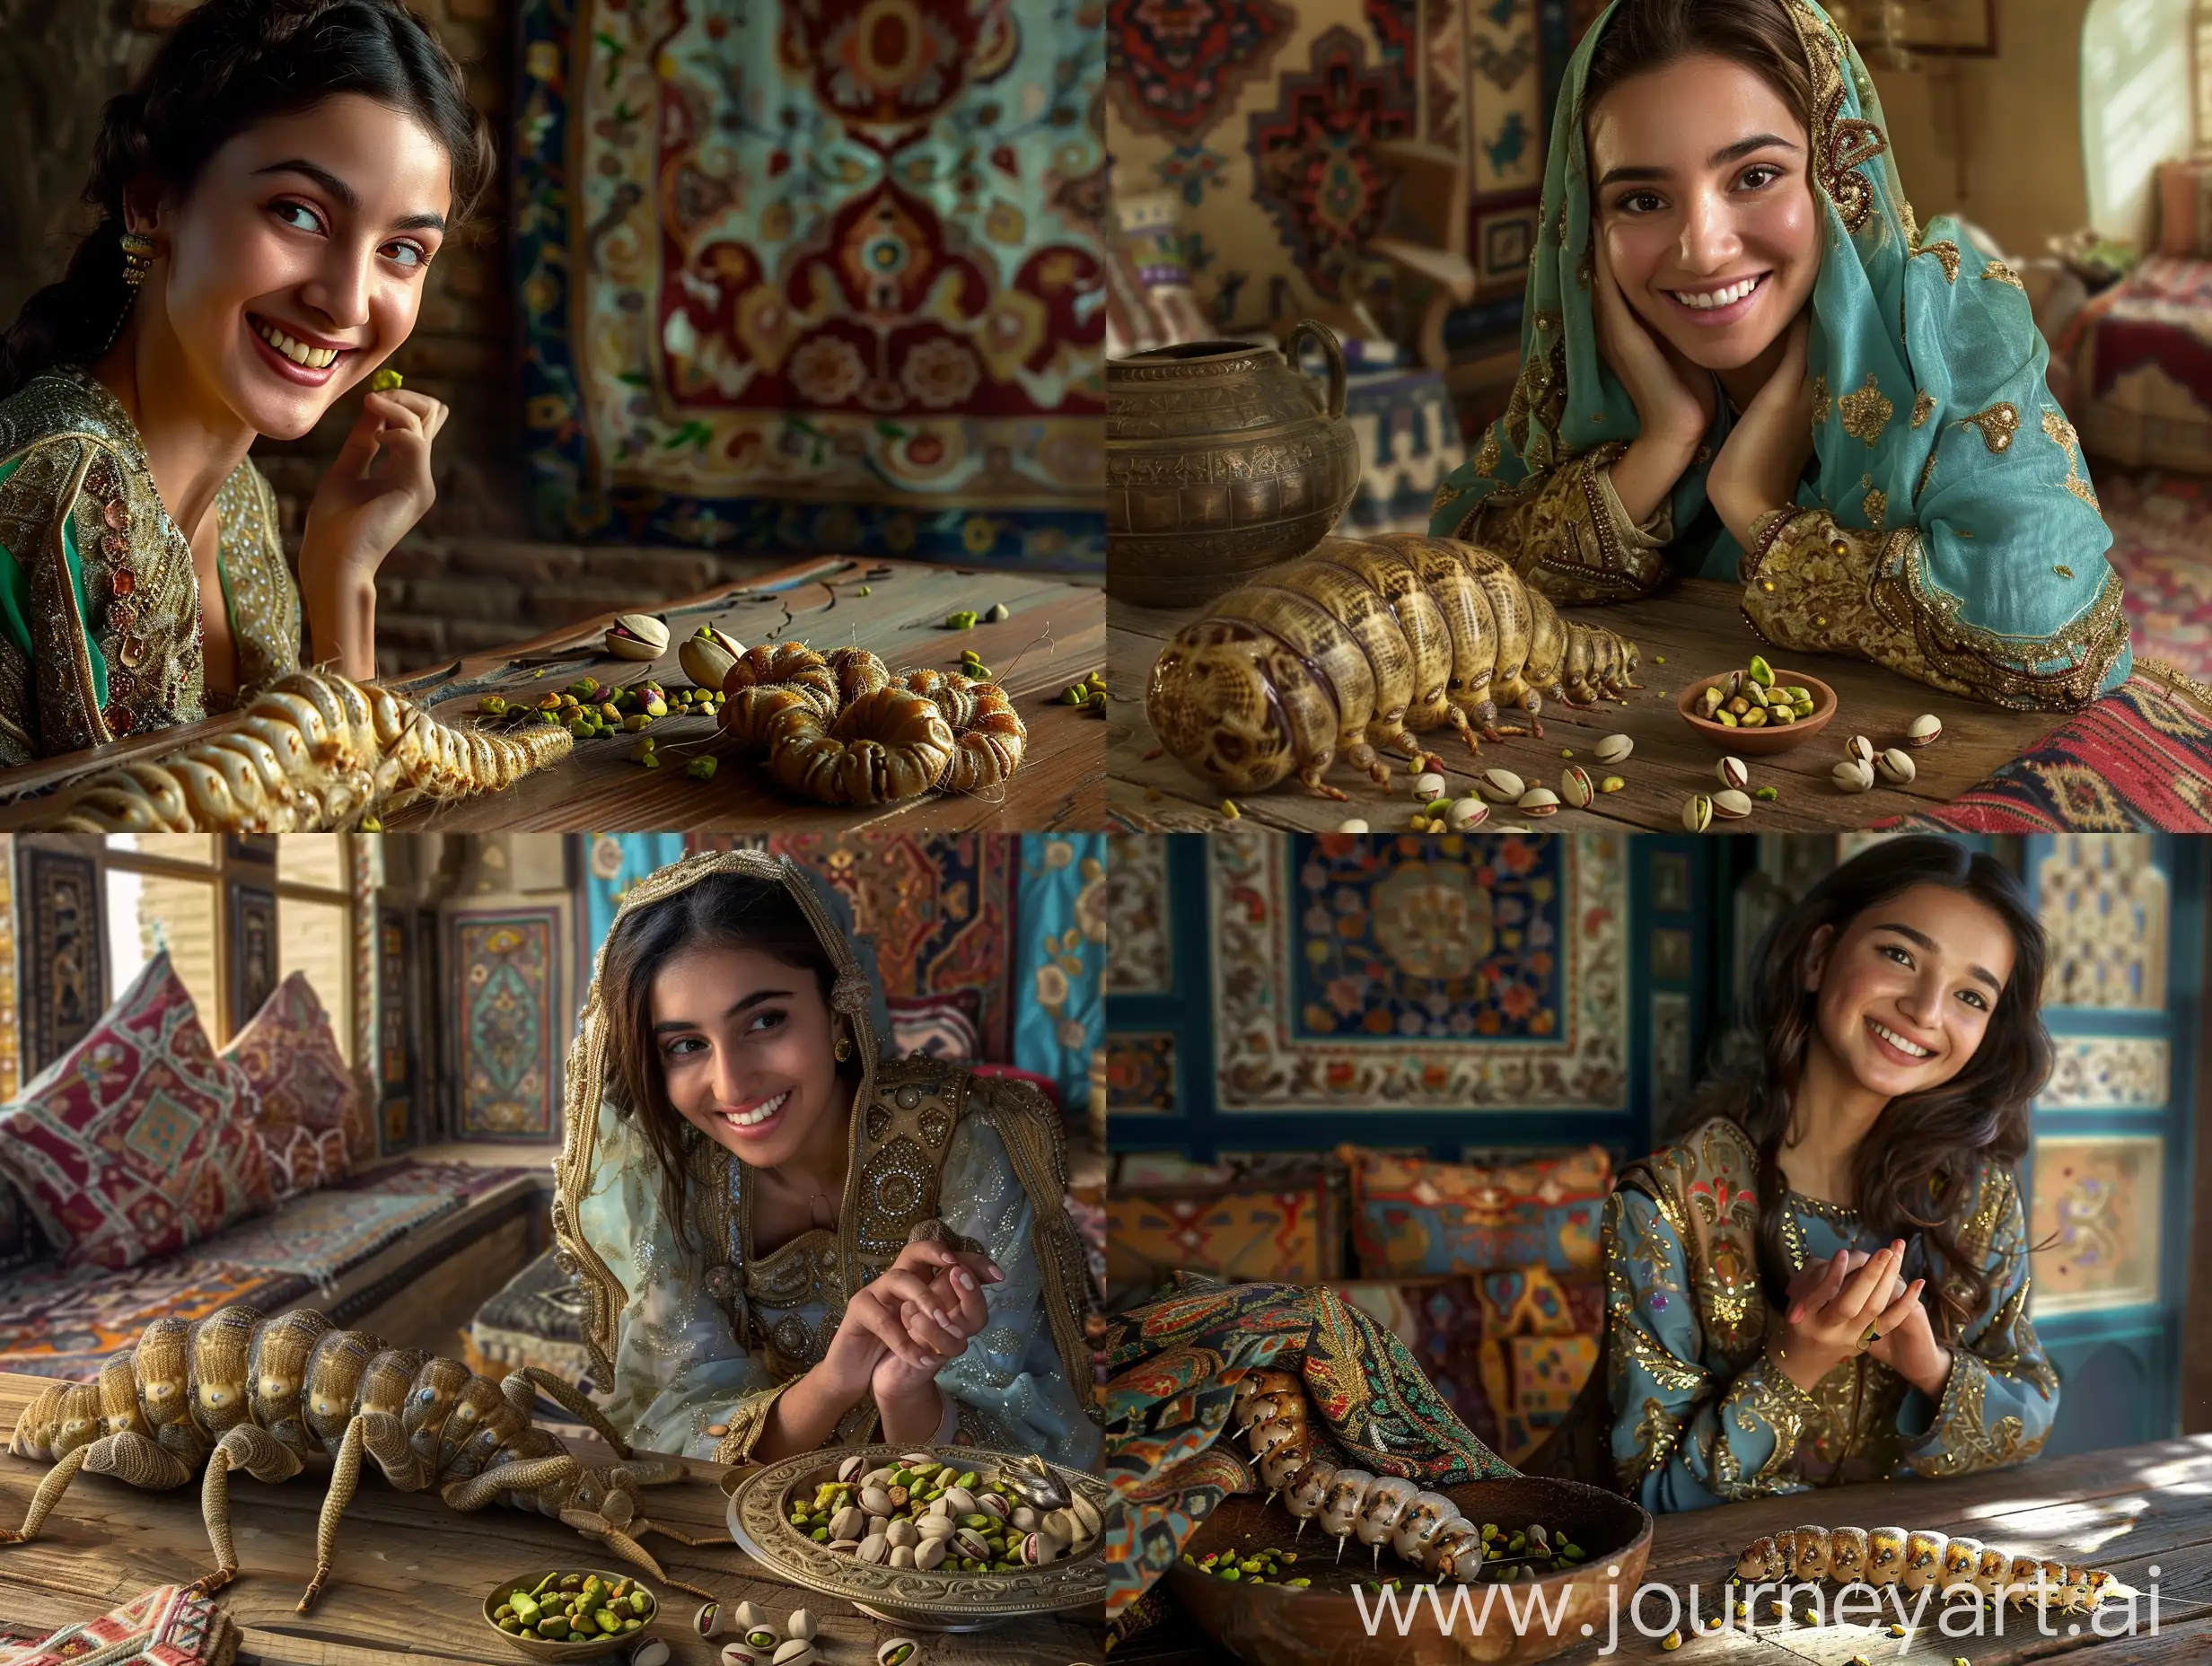 Persian-Woman-Smiling-with-Giant-Silkworm-in-Traditional-Room